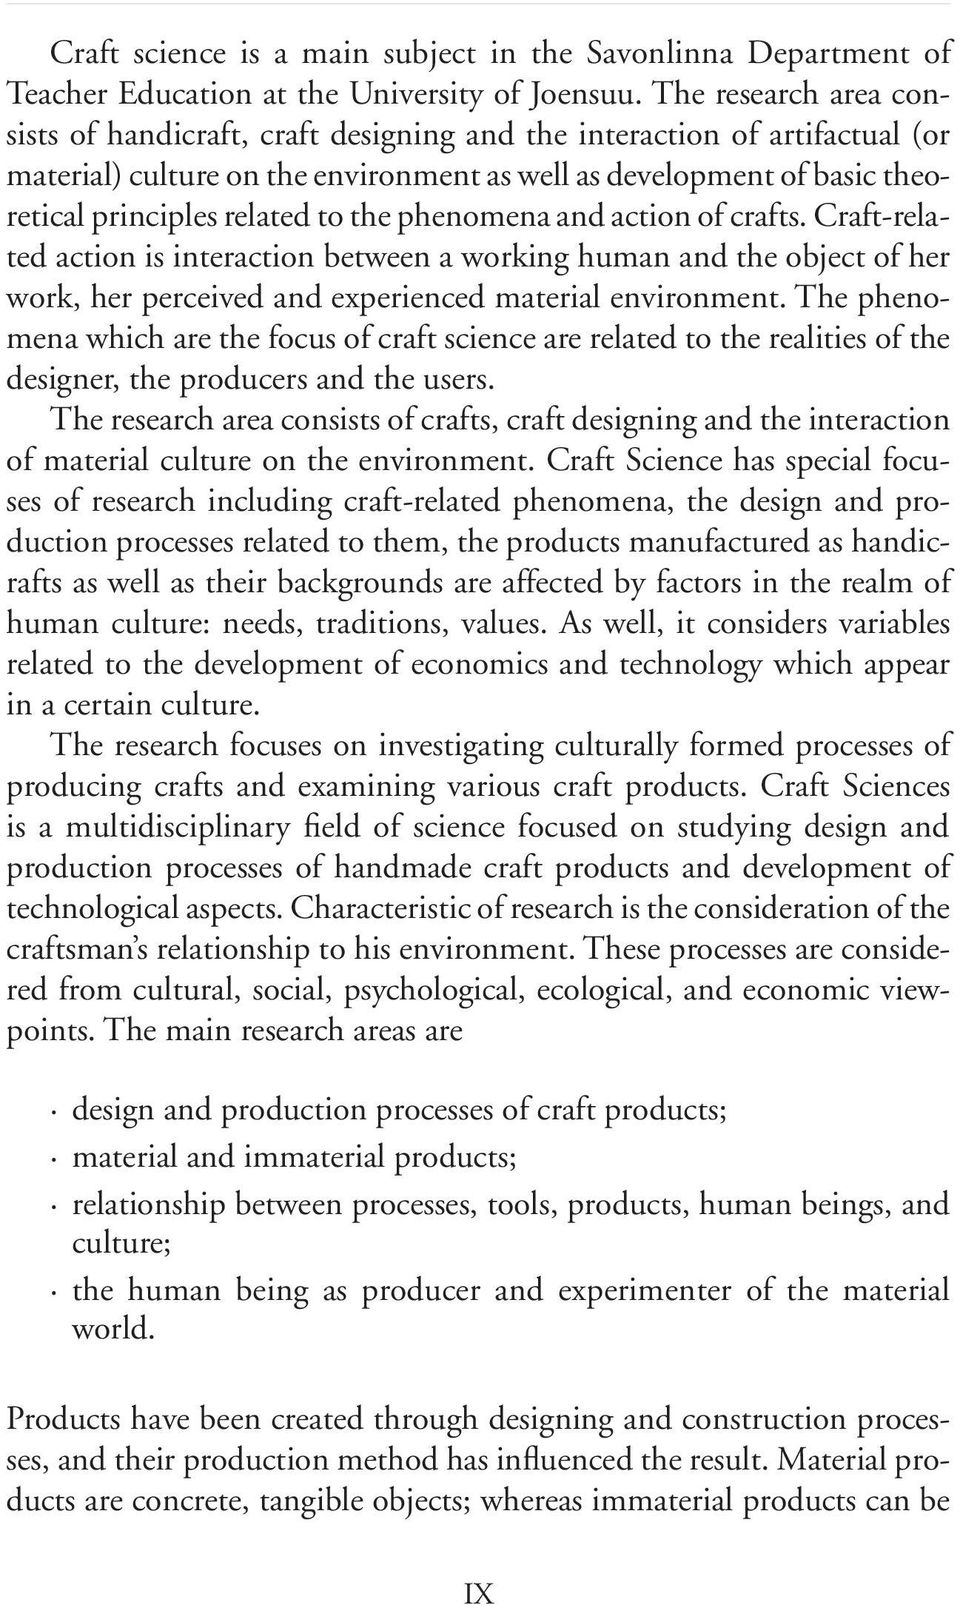 the phenomena and action of crafts. Craft-related action is interaction between a working human and the object of her work, her perceived and experienced material environment.